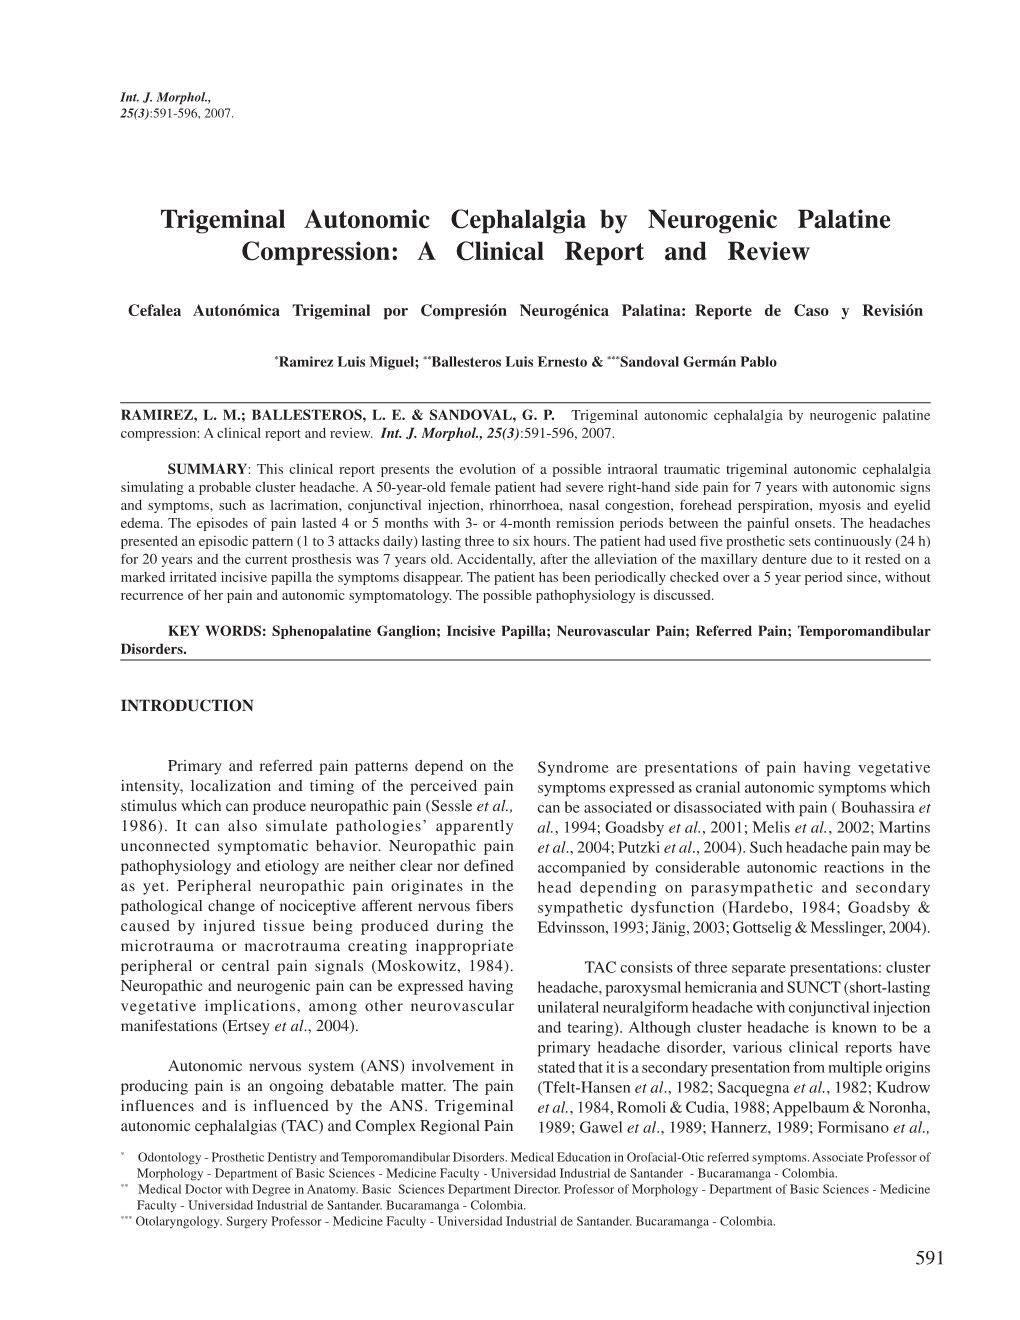 Trigeminal Autonomic Cephalalgia by Neurogenic Palatine Compression: a Clinical Report and Review